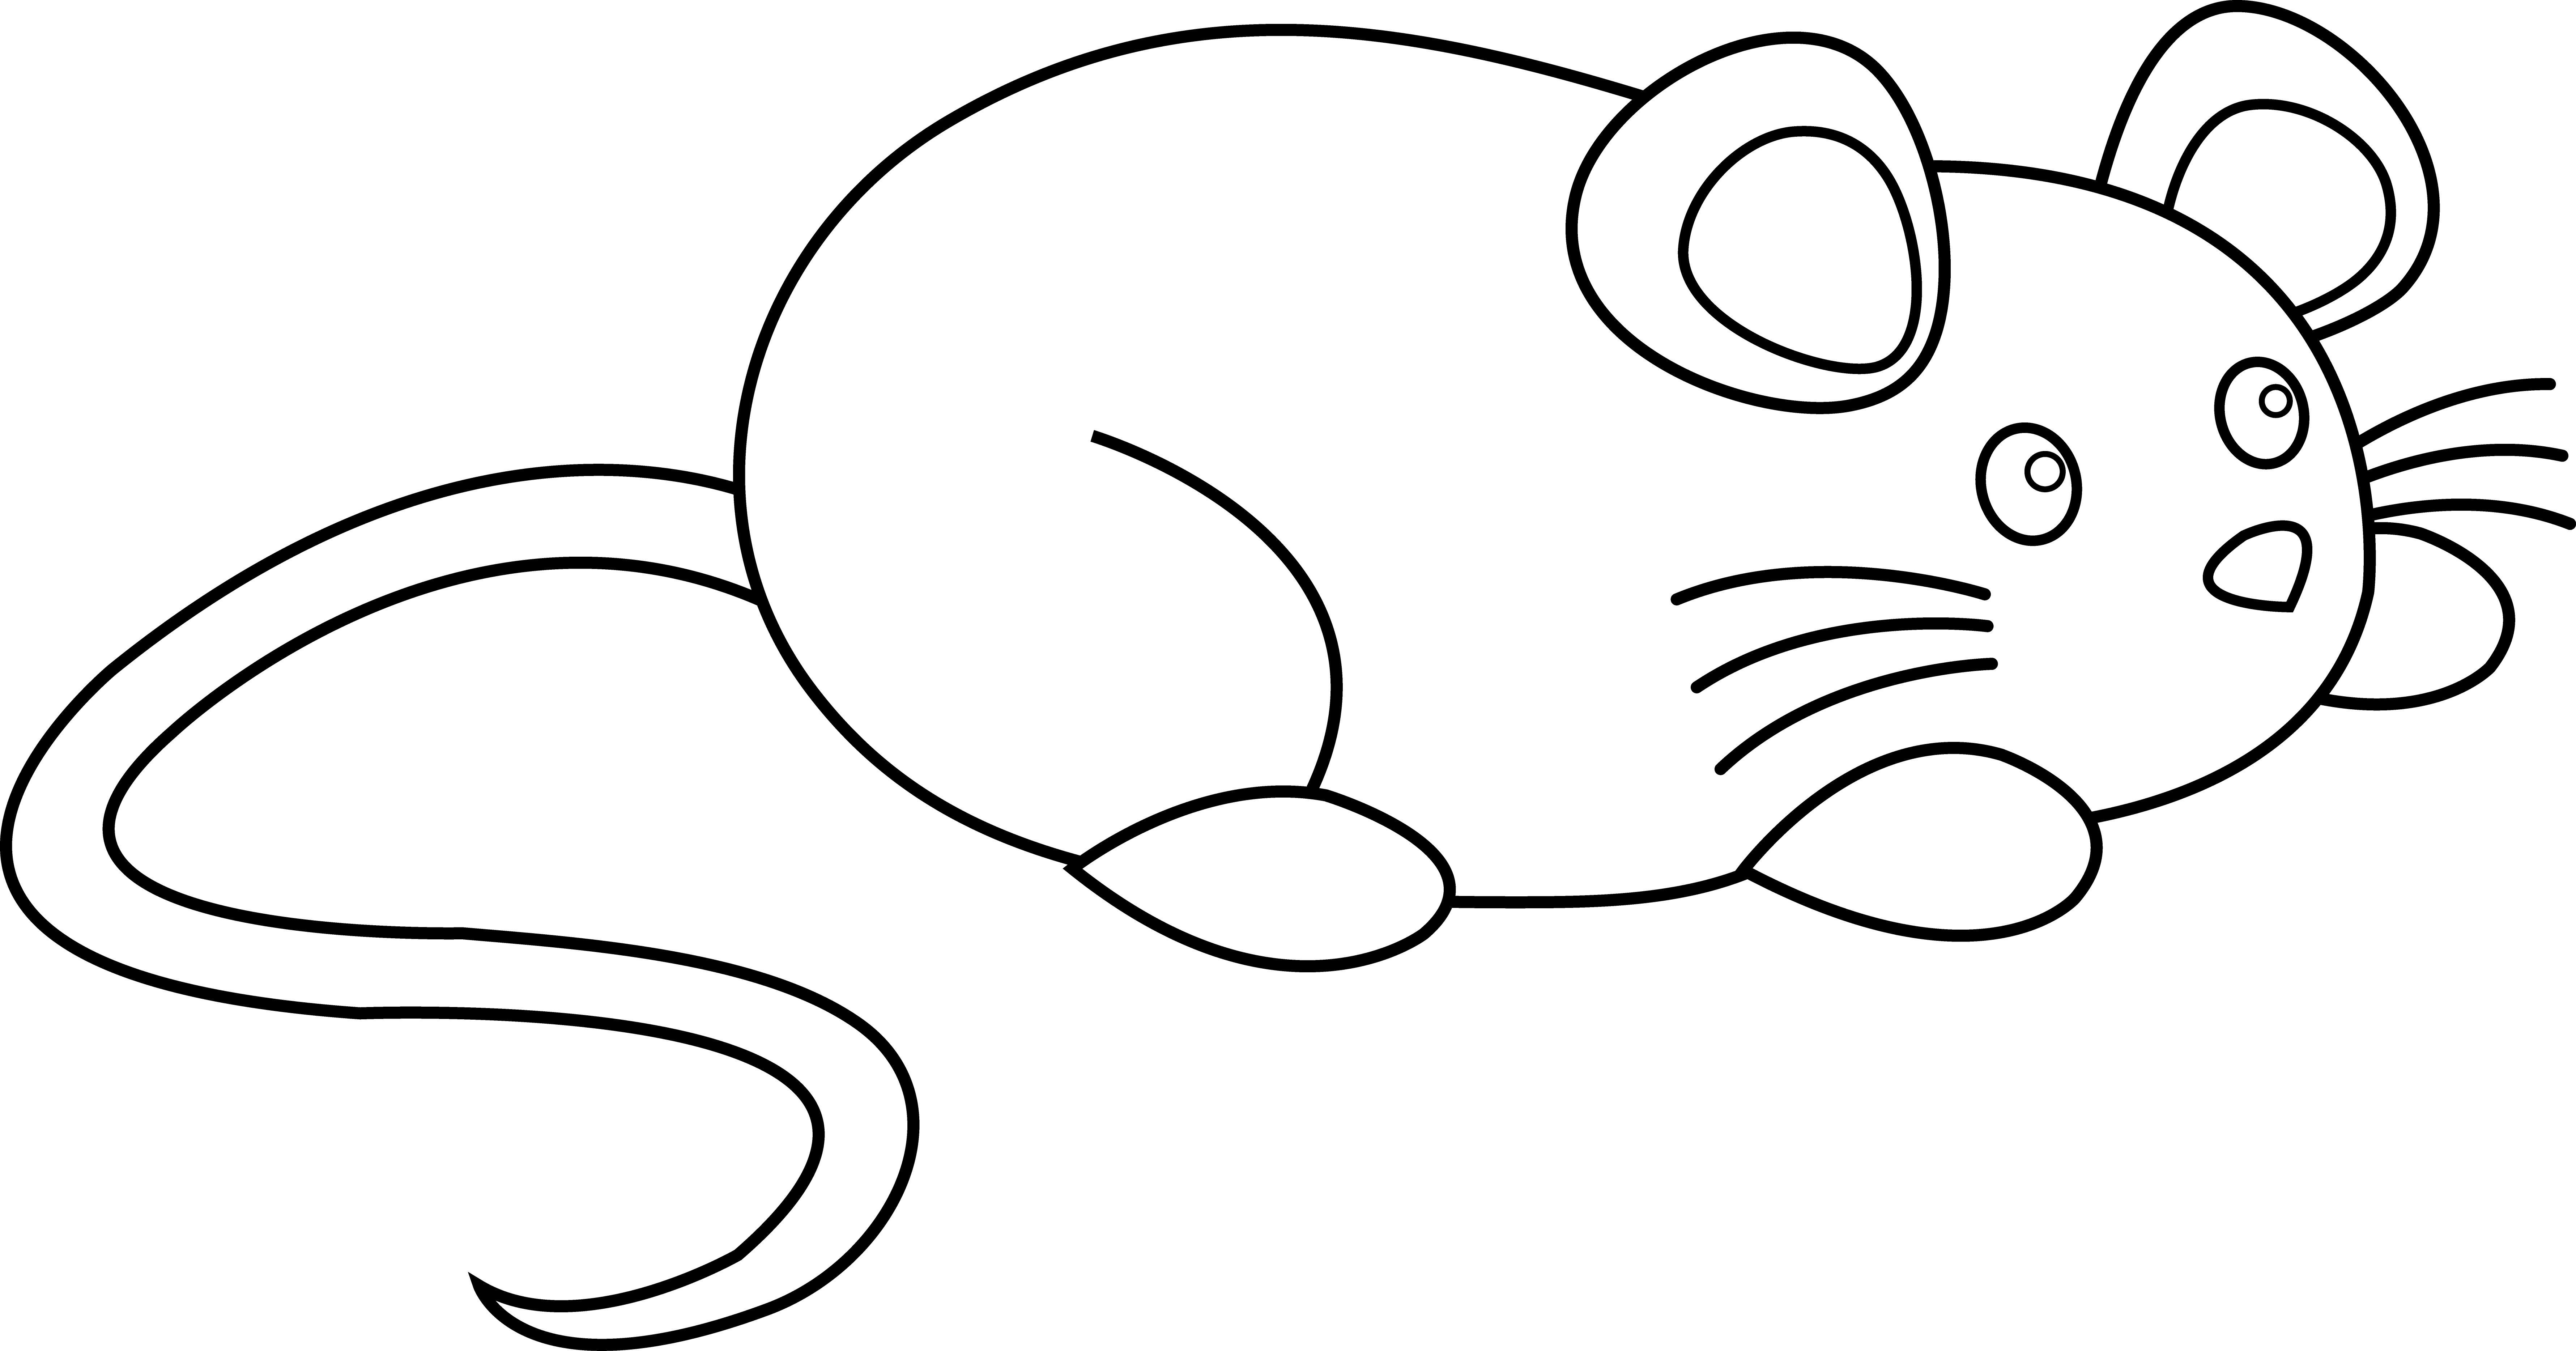 Cute Mouse Clip Art Black And White Images & Pictures - Becuo